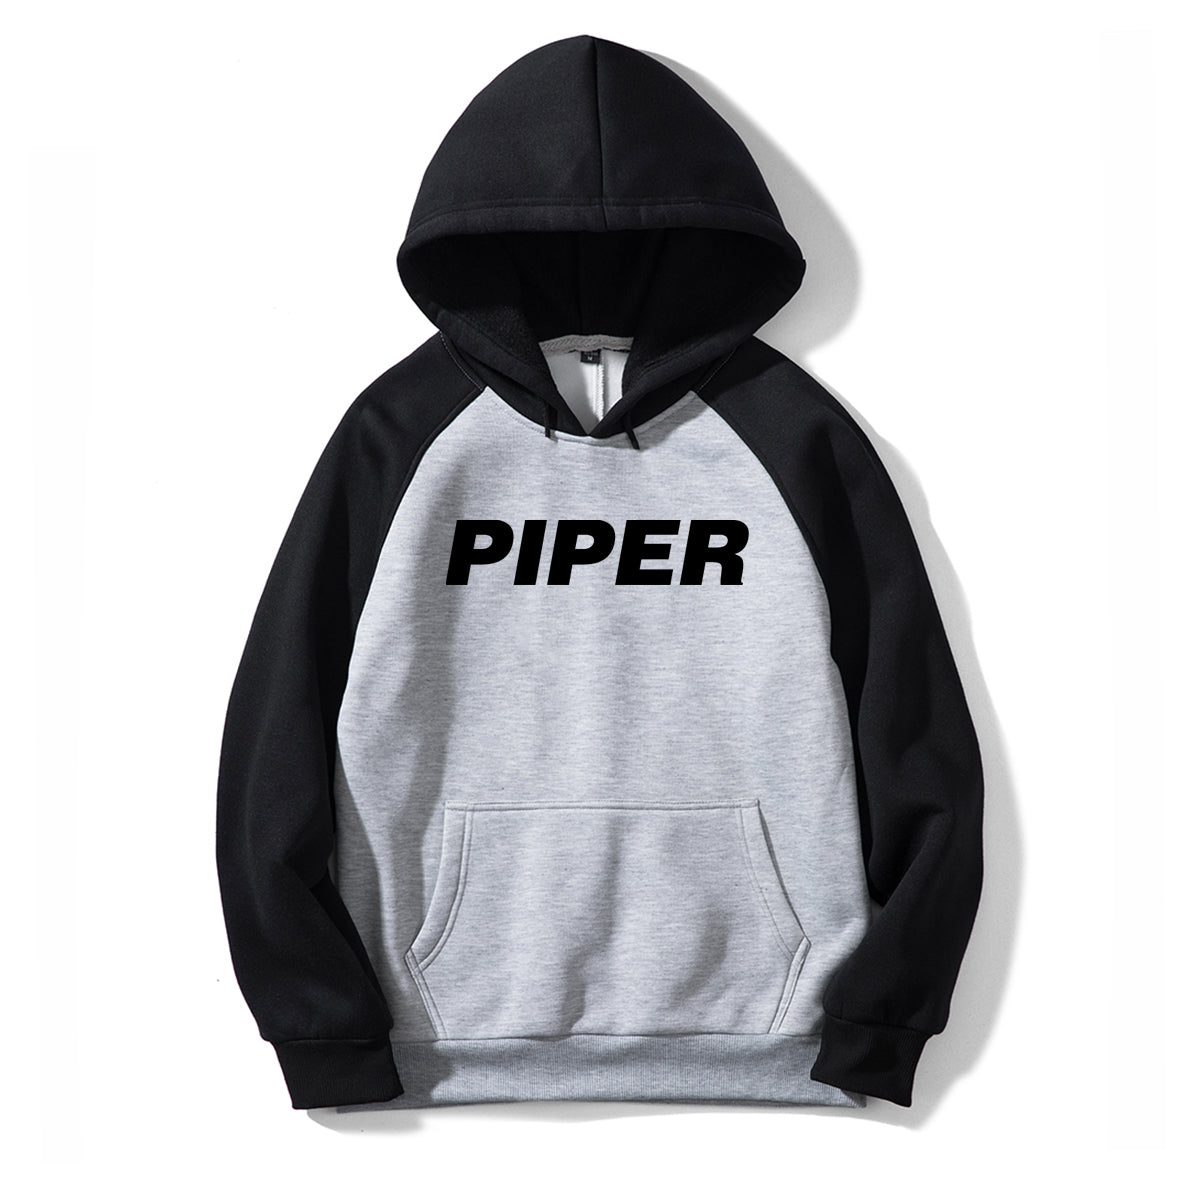 Piper & Text Designed Colourful Hoodies